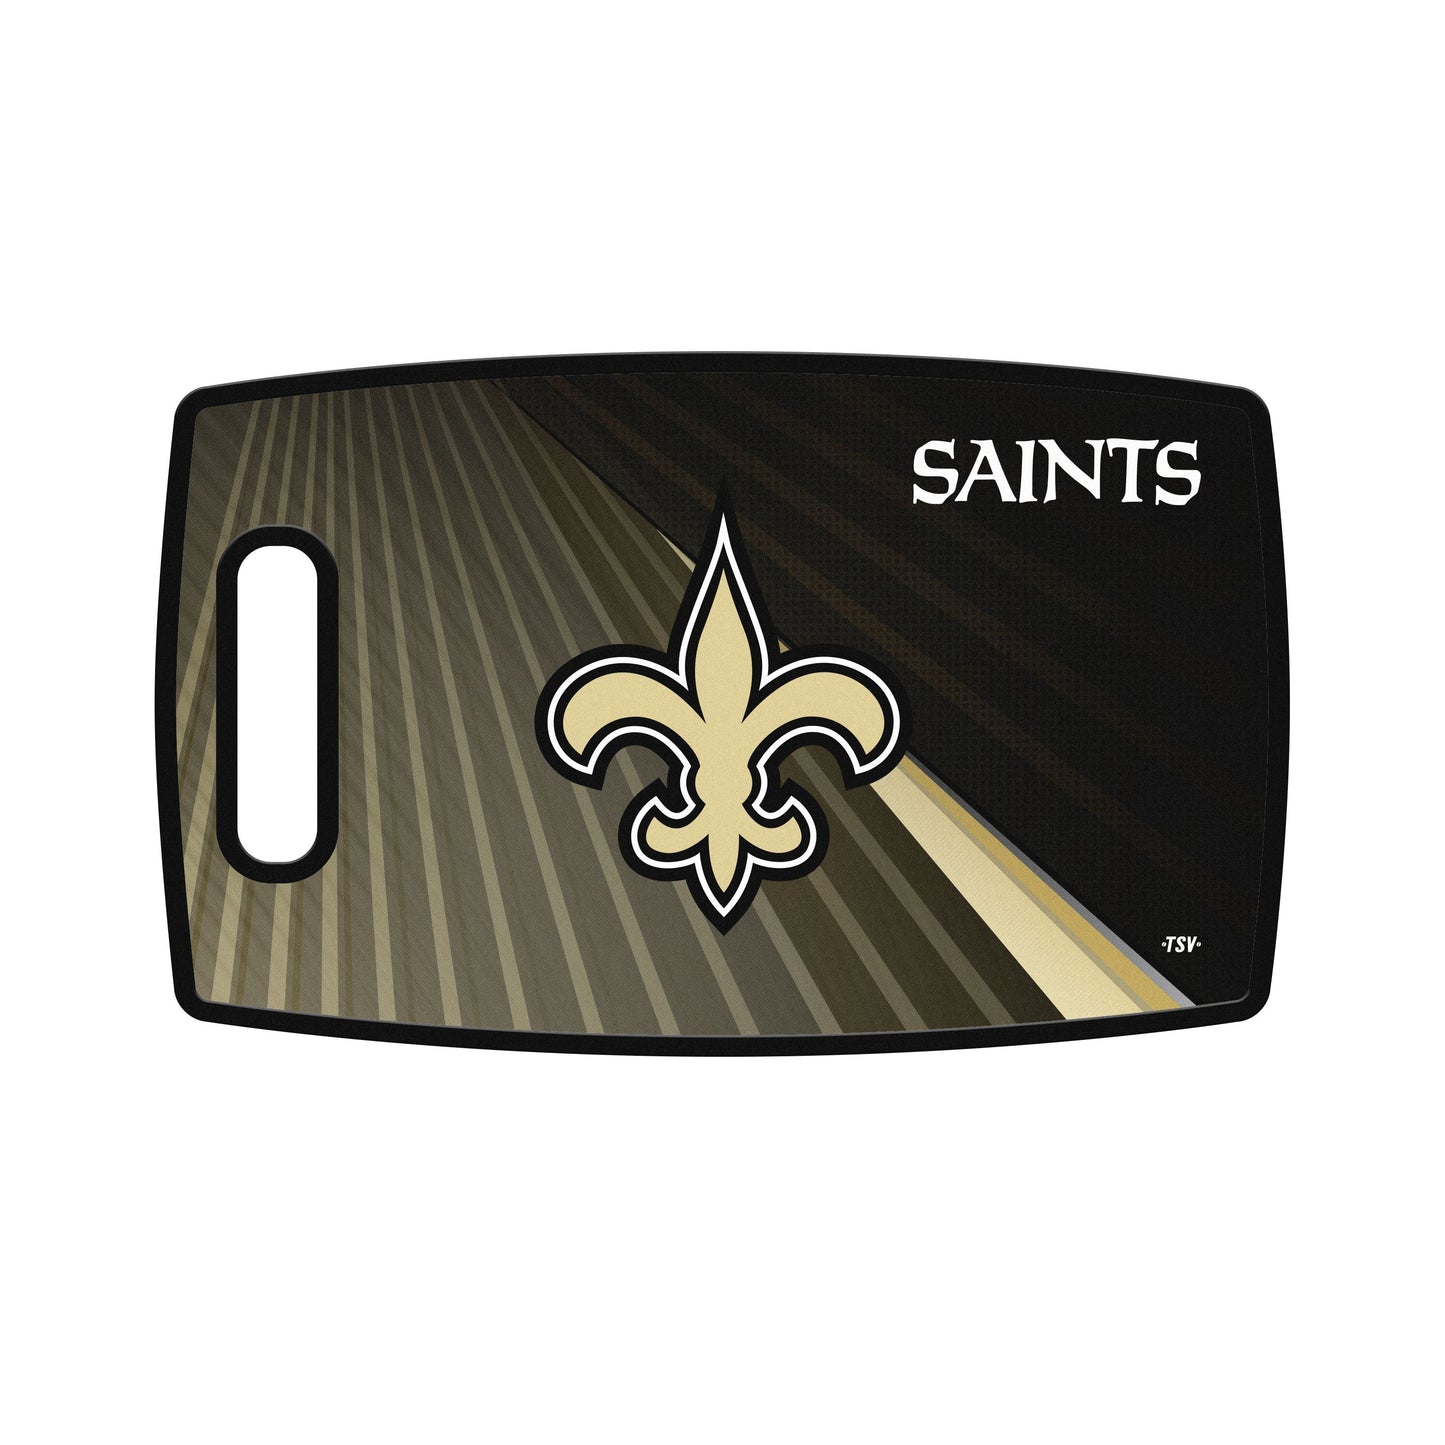 New Orleans Saints Large 9.5" x 14.5" Cutting Board by Sports Vault